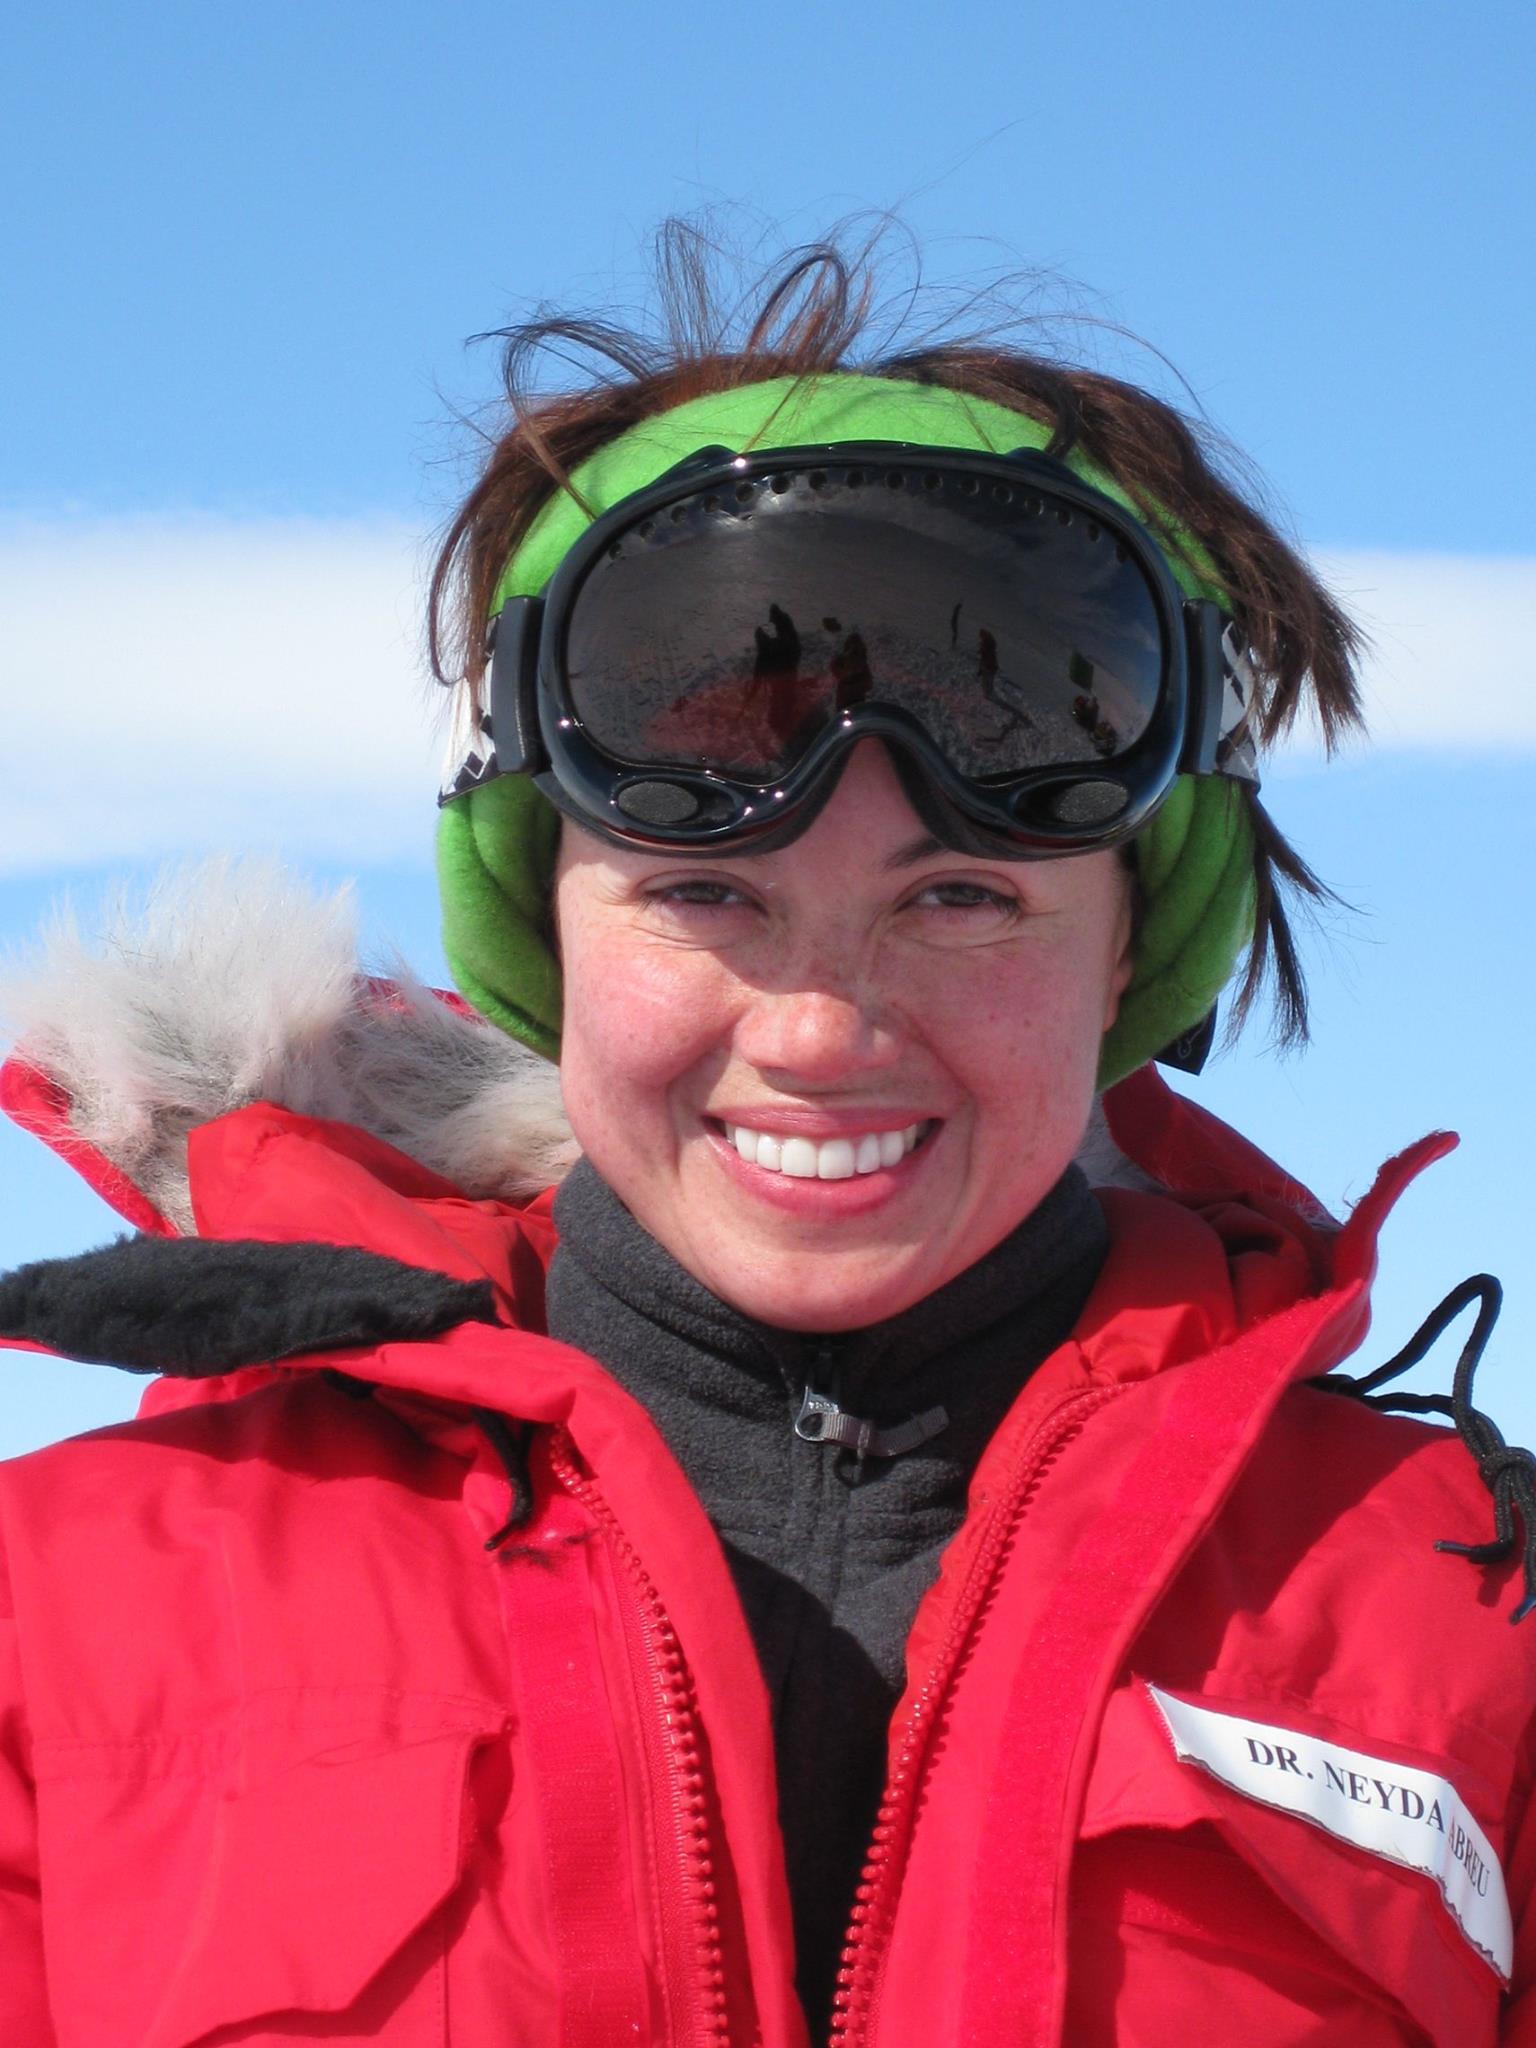 Neyda Abreu, senior advisor for science and research at NASA's Langley Research Center, on a meteorite-collecting trip in Antarctica.